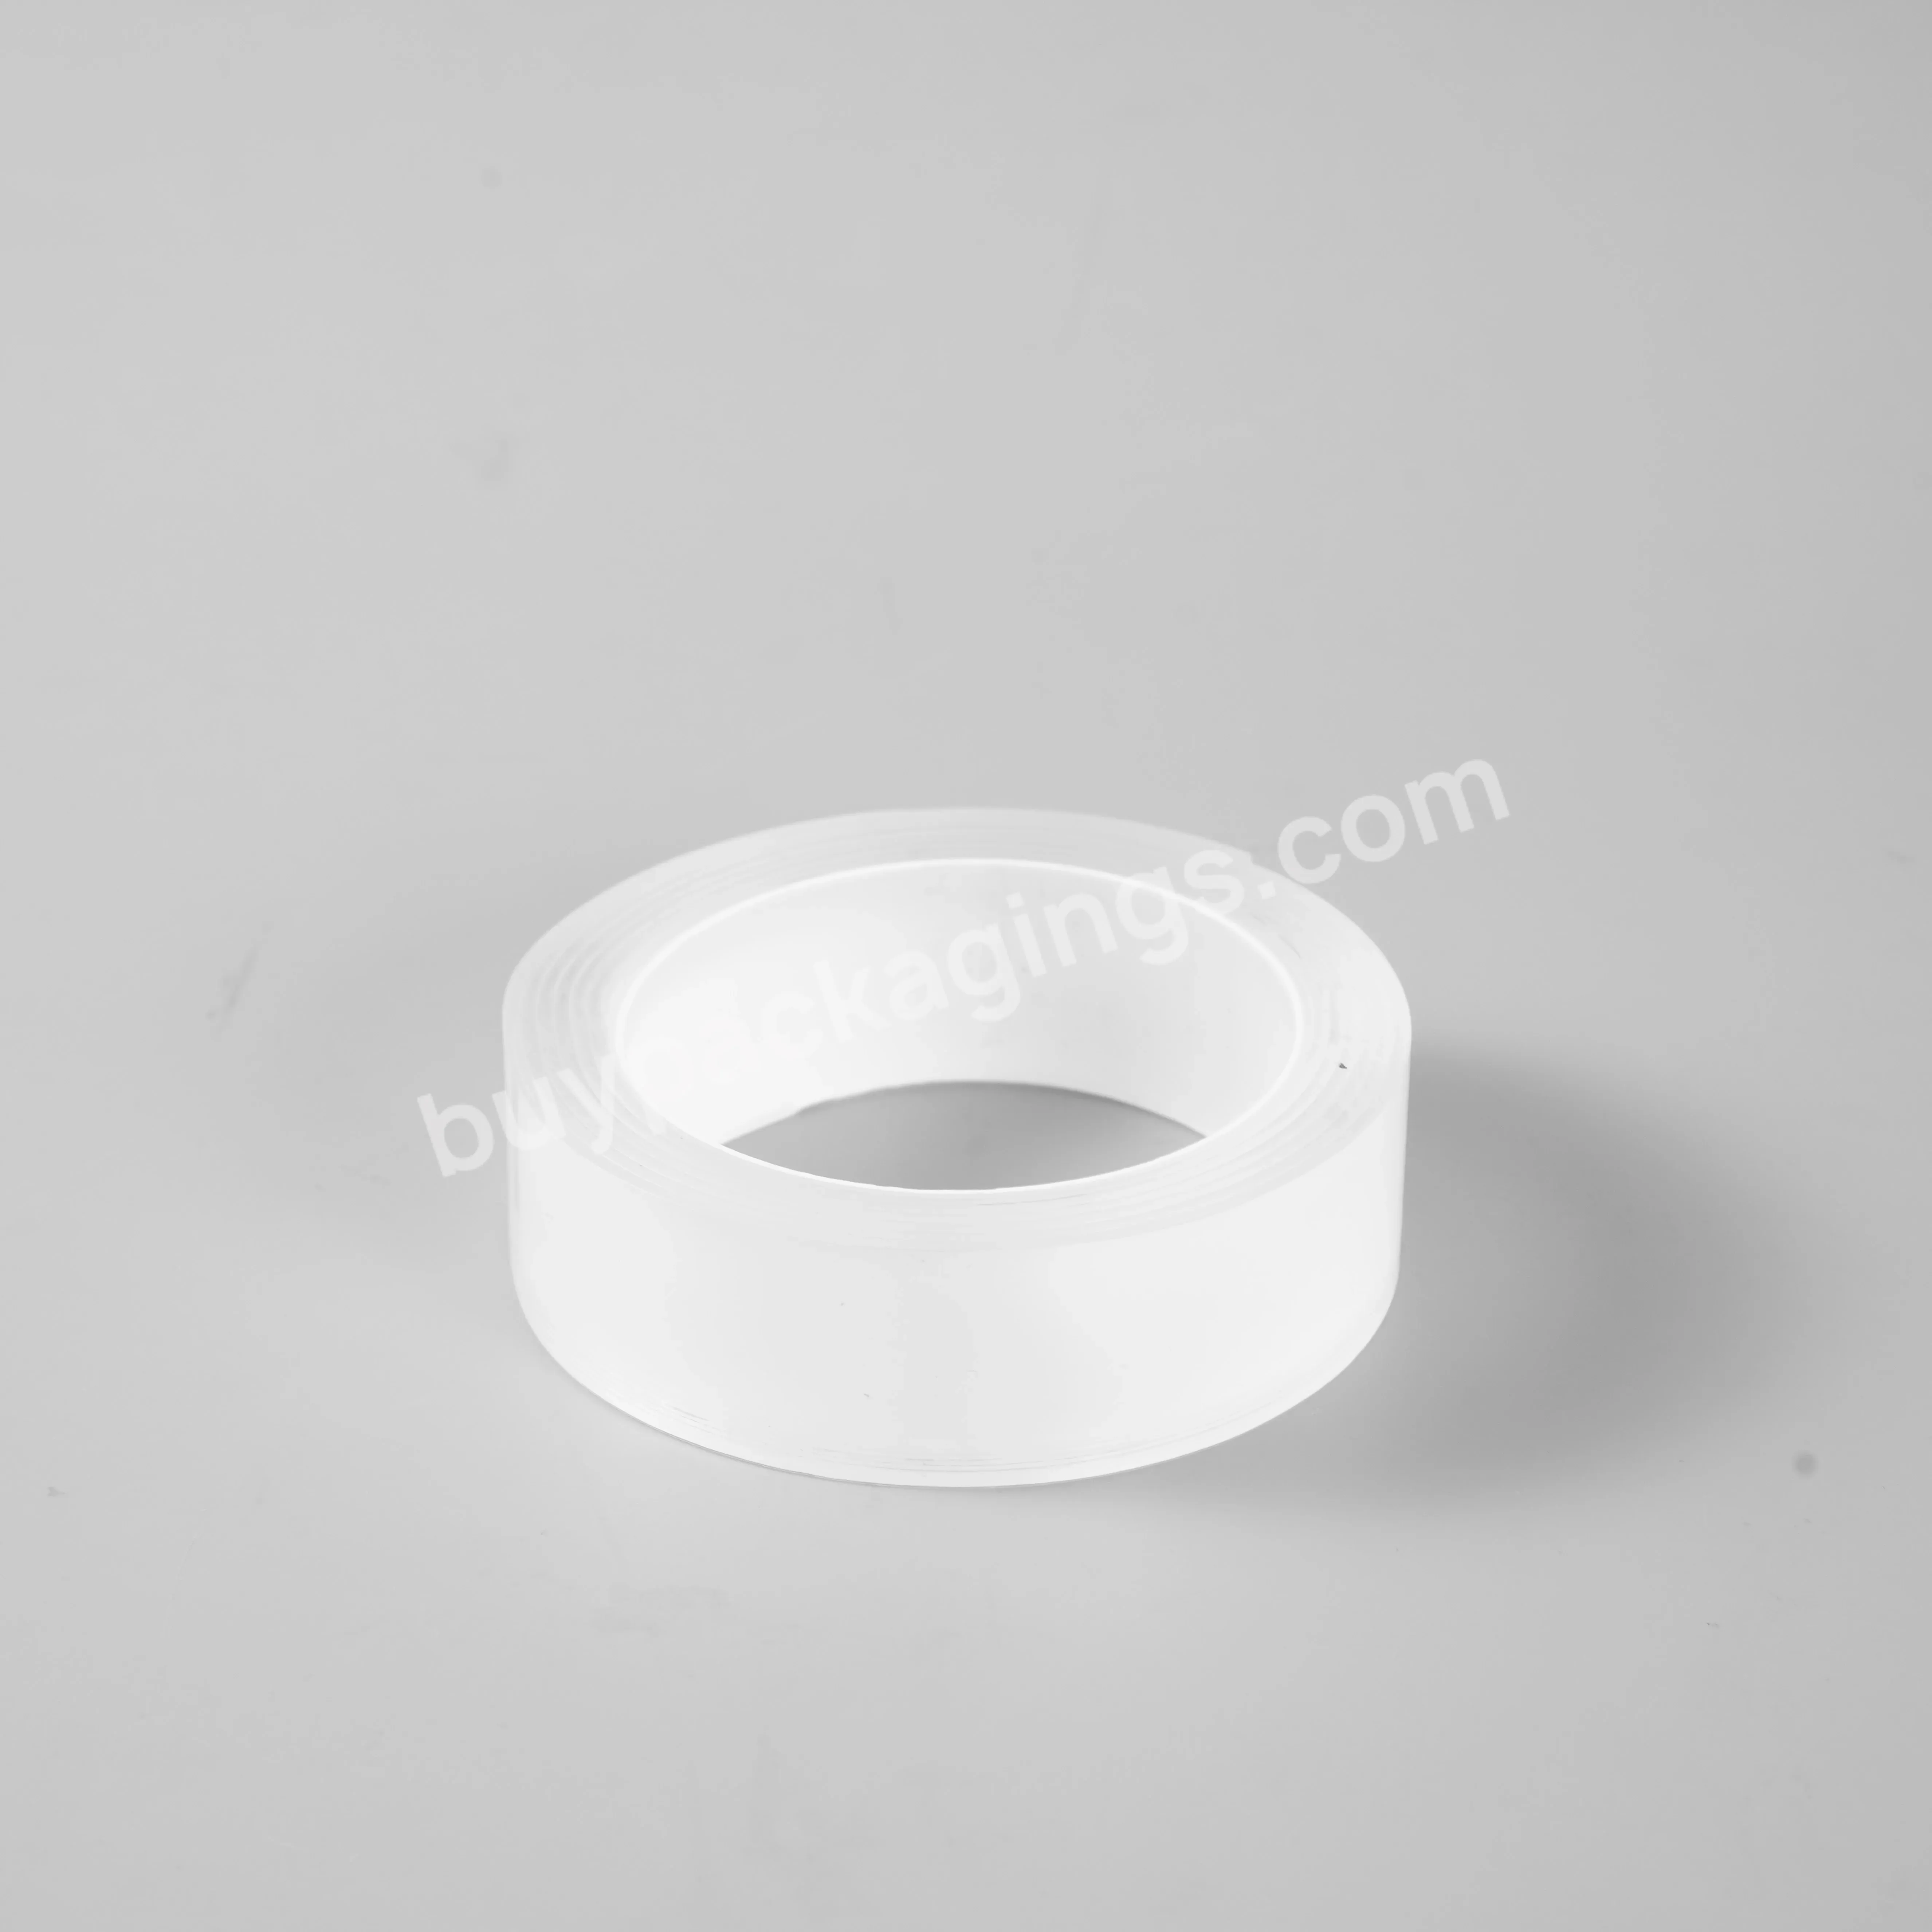 Customized Waterproof Washable Reusable Adhesive Acrylic Nano Transparent Double Sided Tape - Buy Customized Waterproof Transparent Double Sided Tape,Washable Reusable Adhesive Acrylic Nano Tape,Odorless Nano Suction Tape Strong Viscosity.